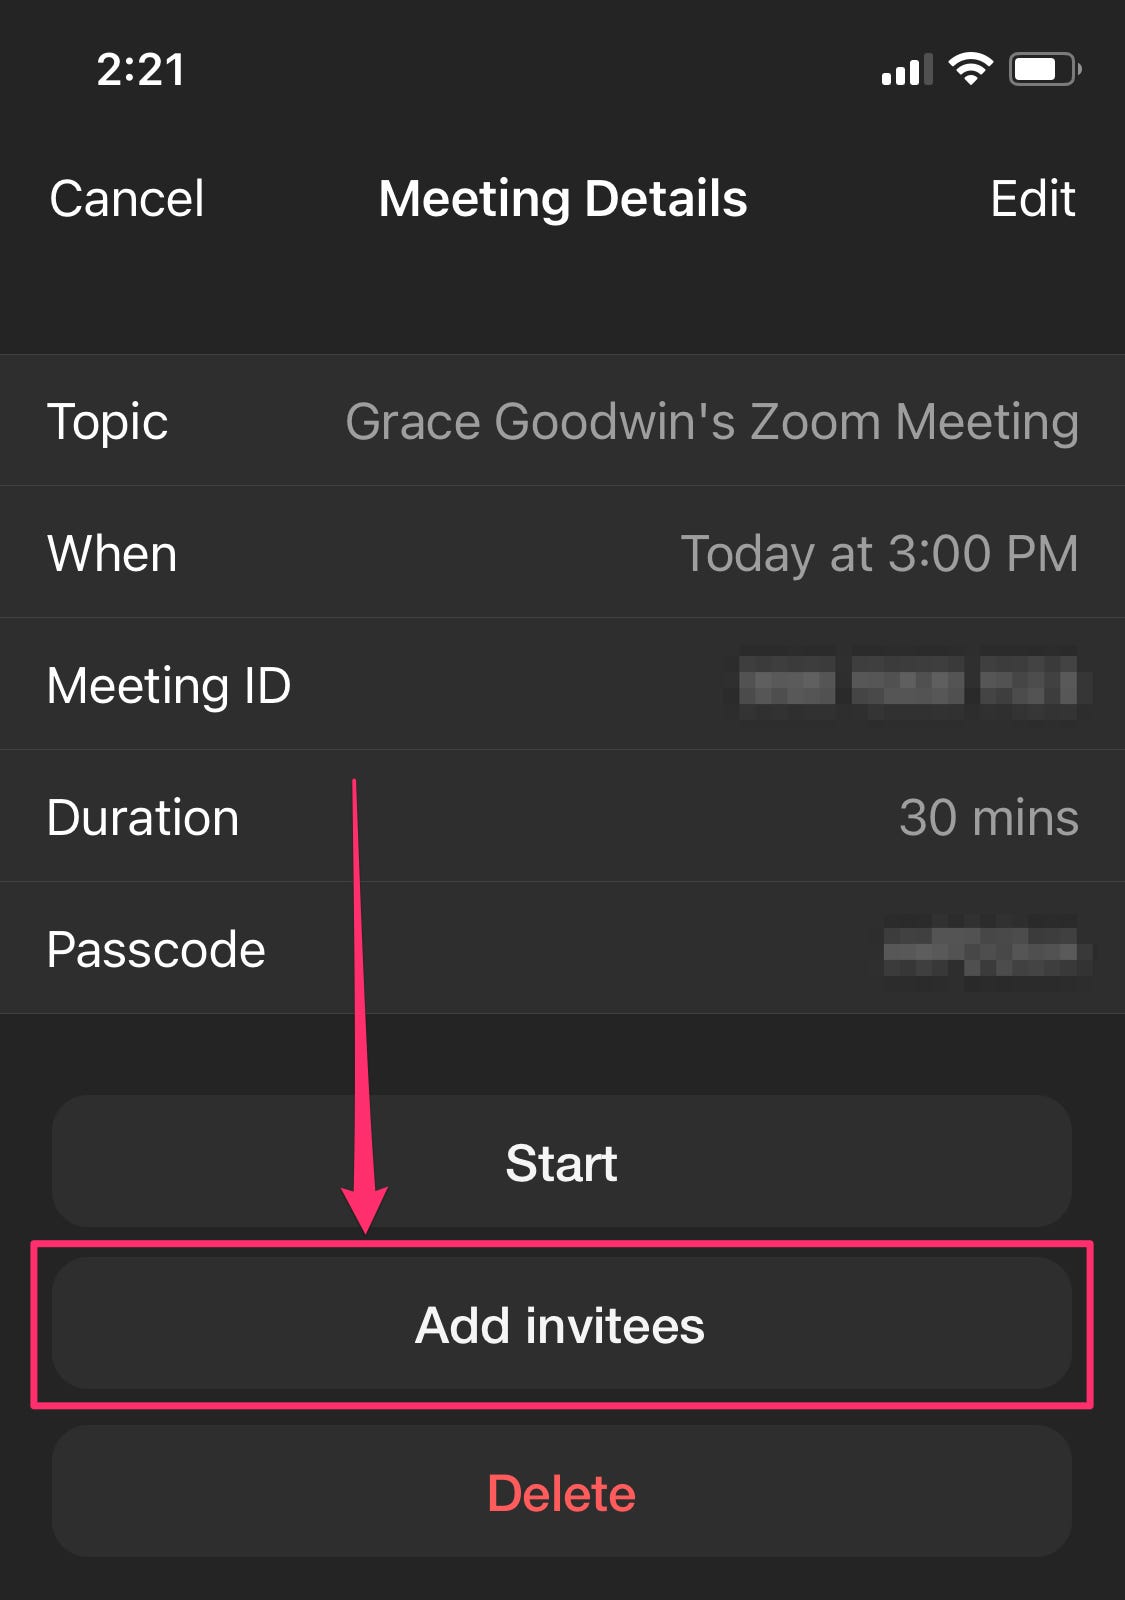 How to set up a Zoom meeting and schedule it in advance to organize